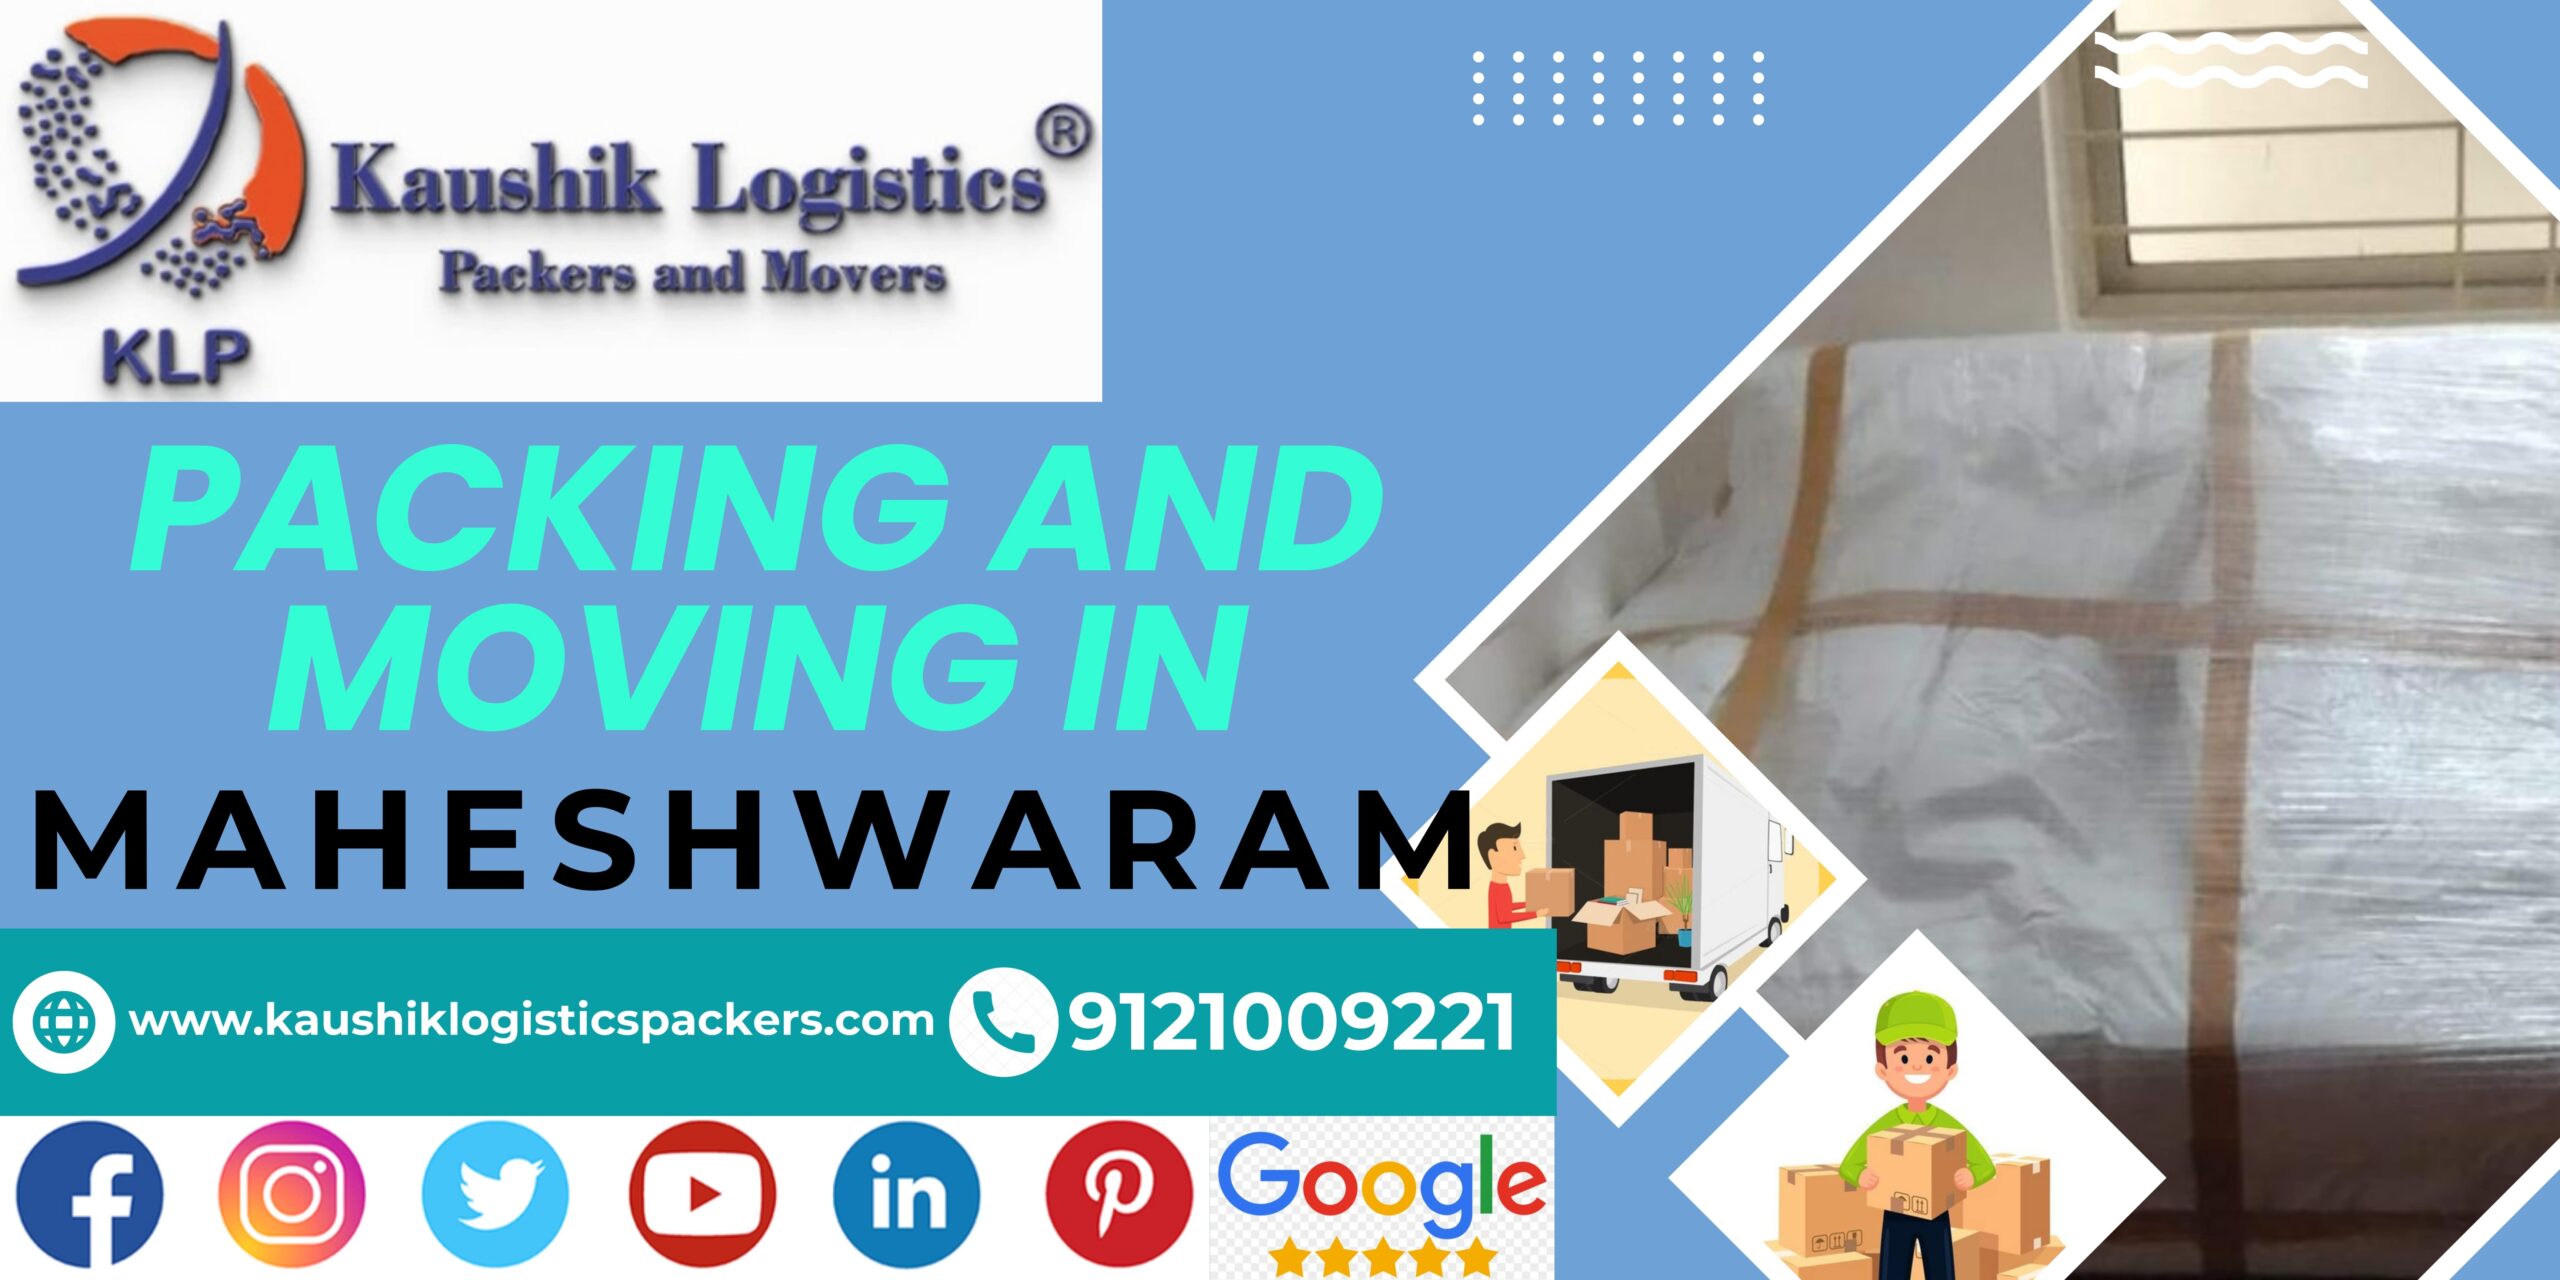 Packers and Movers In Maheshwaram